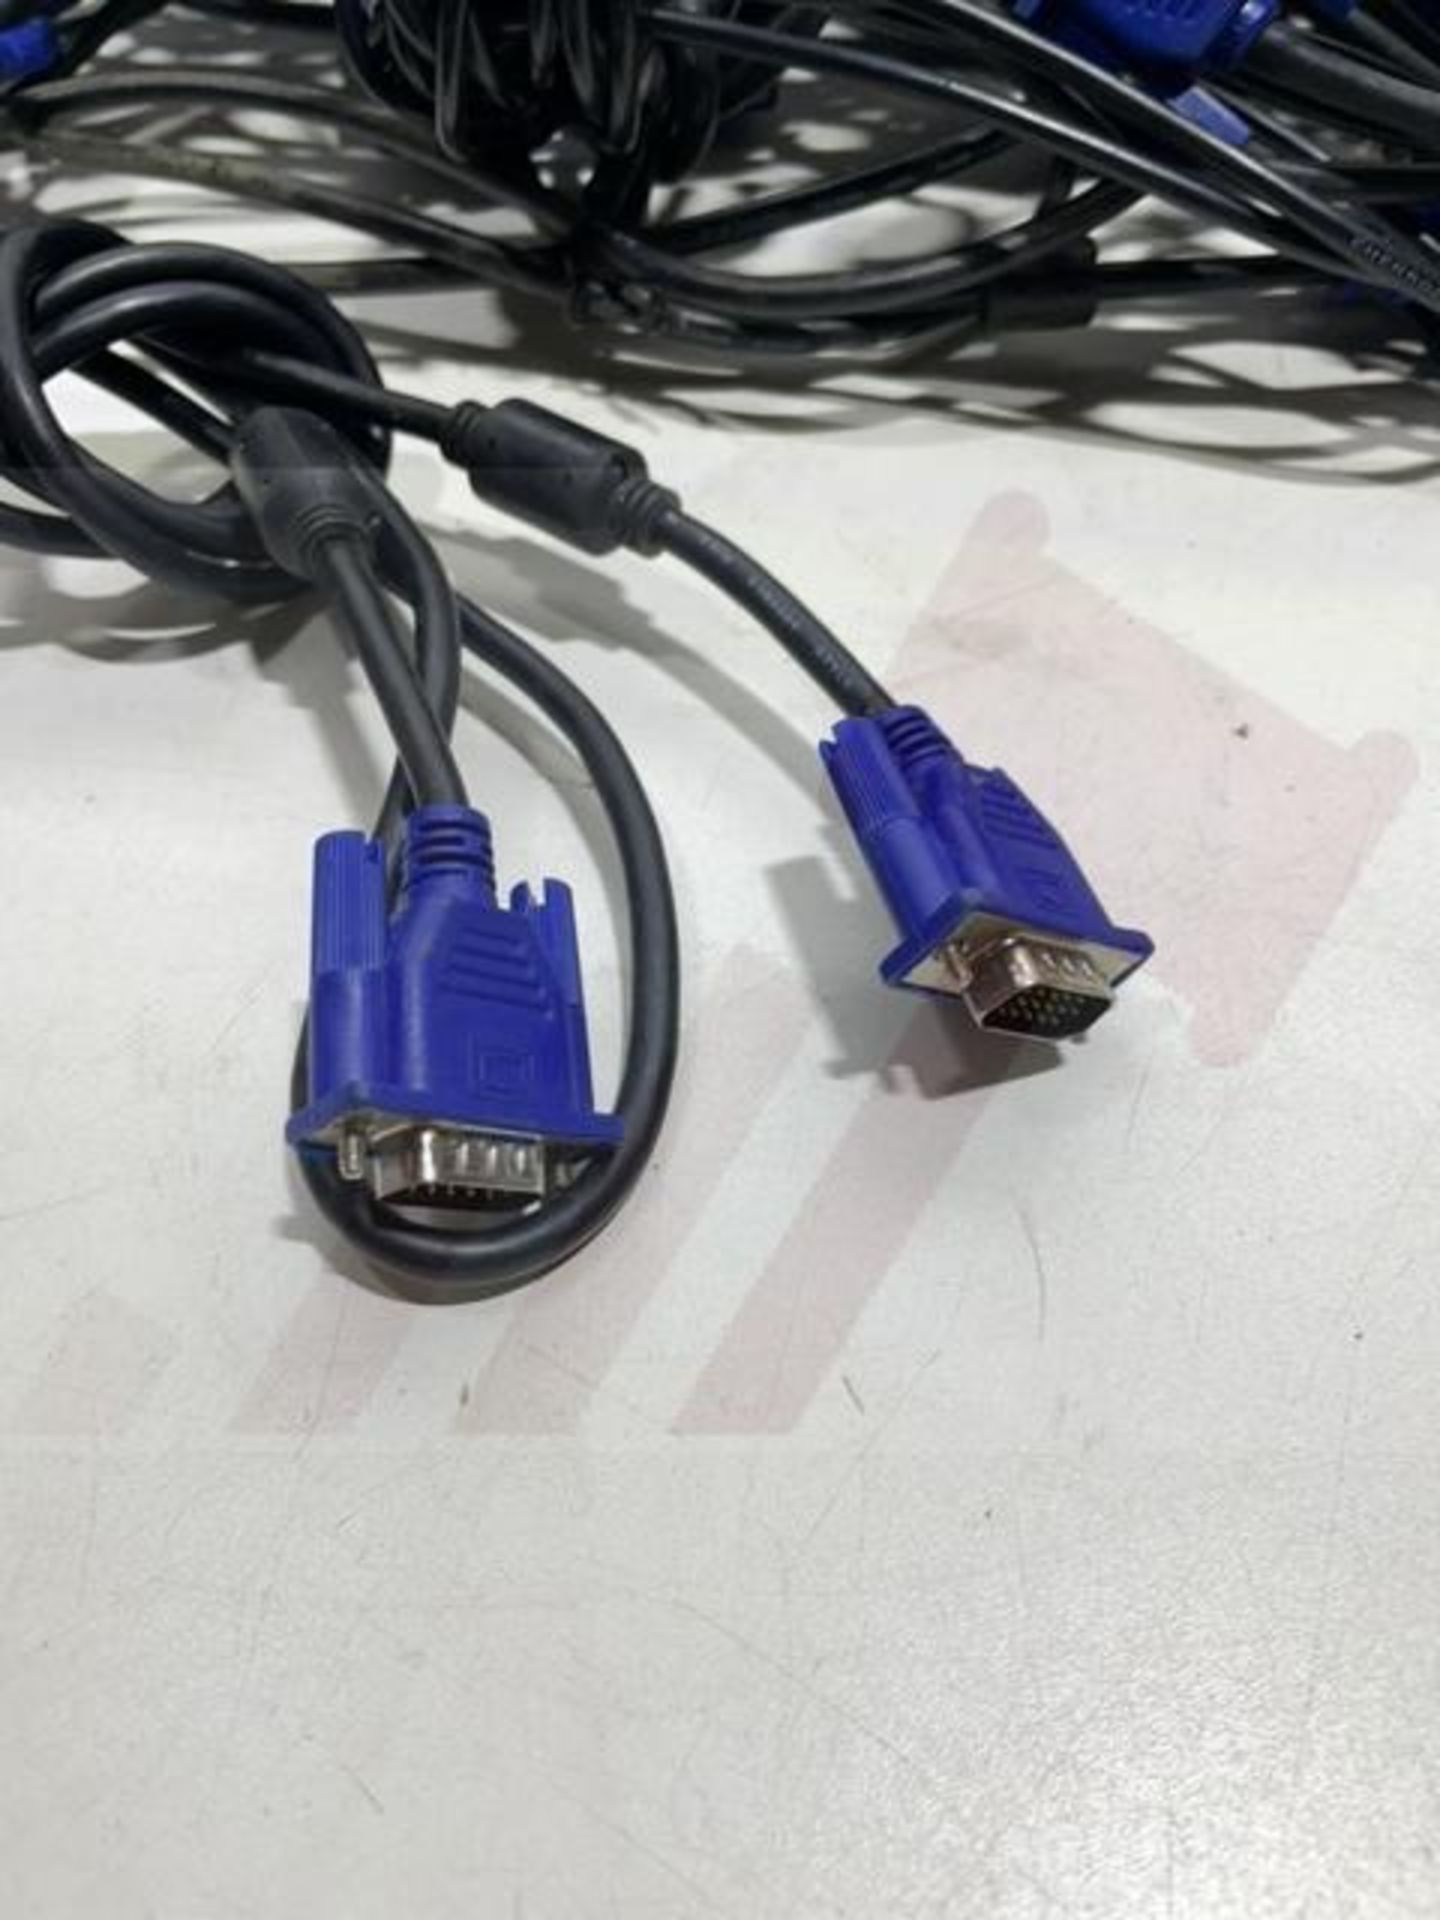 30 X VGA to VGA Cables | See Pictures for more Details - Image 2 of 3